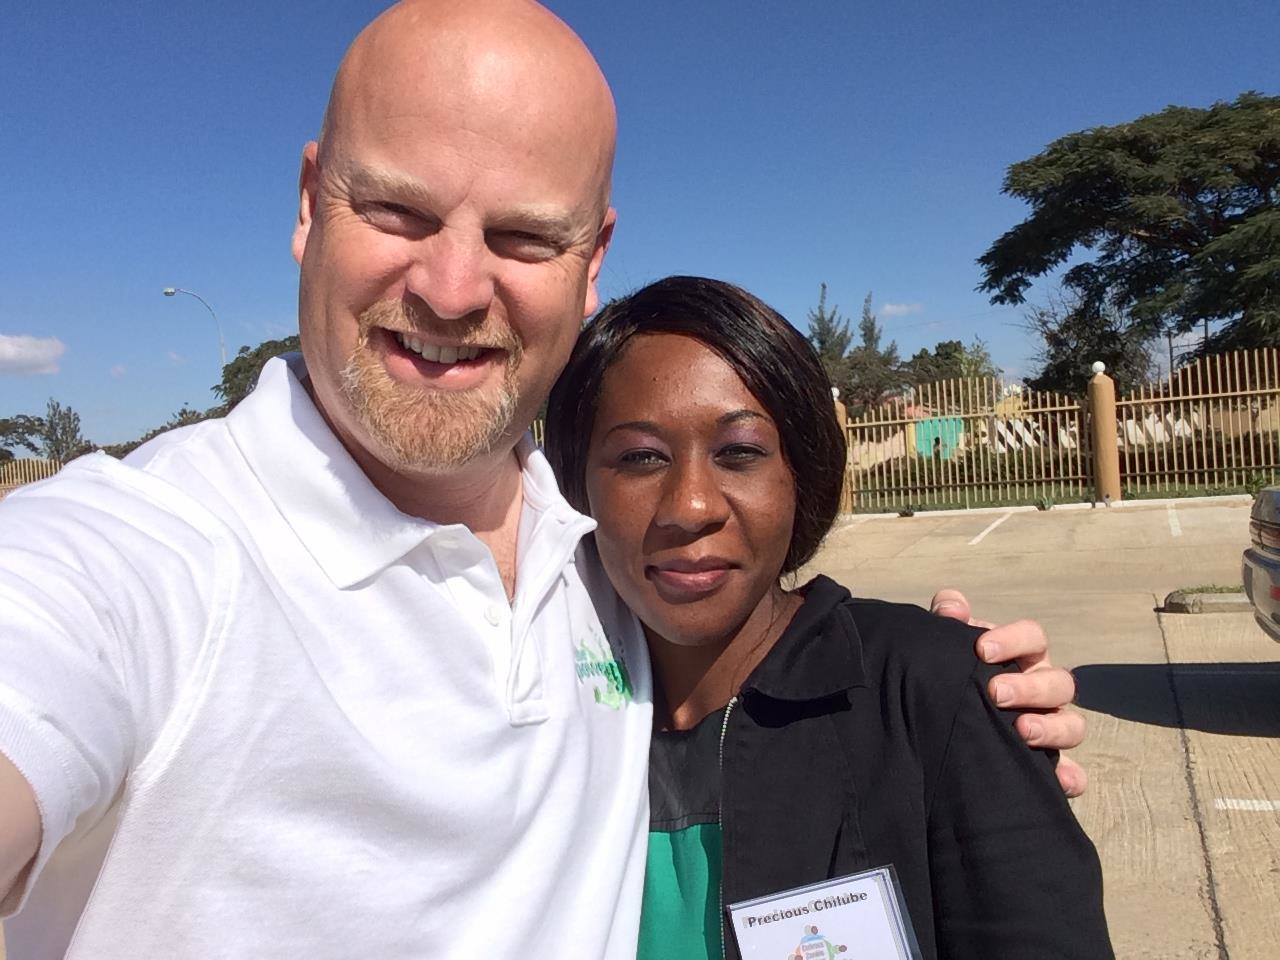 Jeff Terry with Precious Chilube at a Power of 5 event. Jeff knows that changing the lives of thousands of malnourished children is a project that must be administered carefully, and that means working through channels and committees and red tape and hurdles.